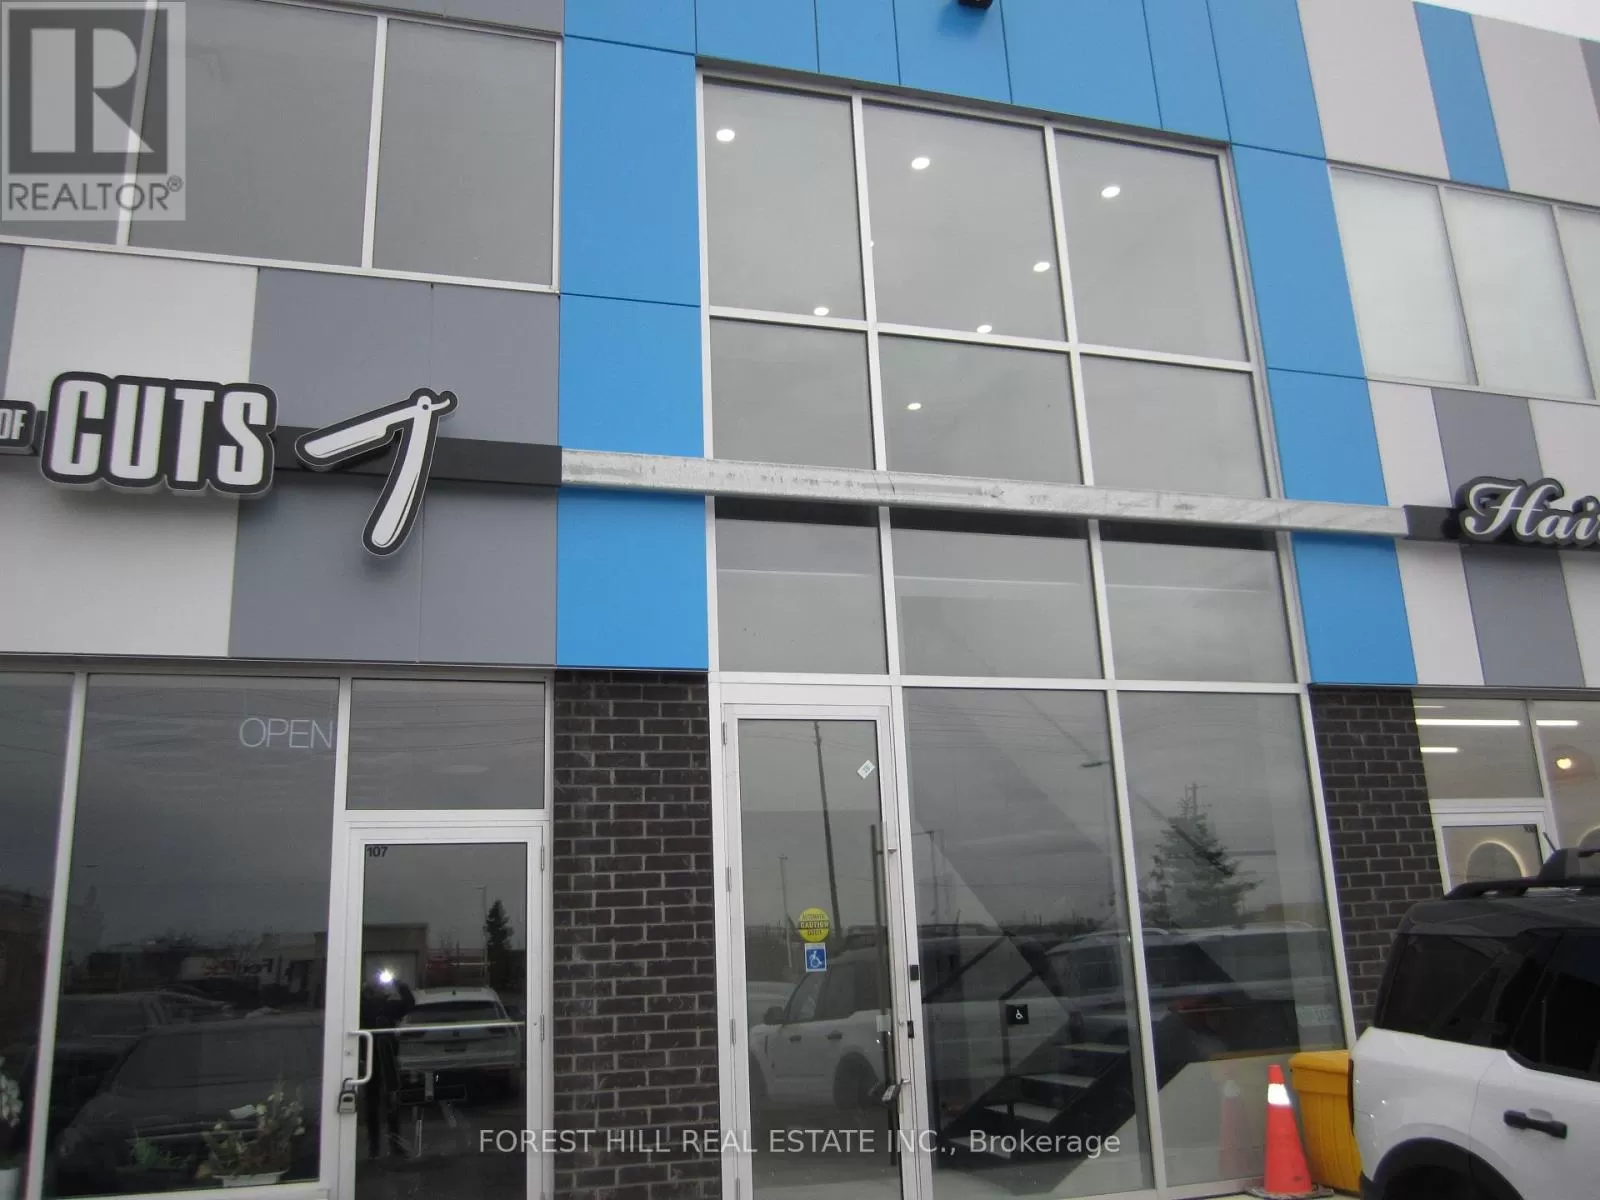 Offices for rent: 202 - 8470 Highway 27, Vaughan, Ontario L4H 5J8